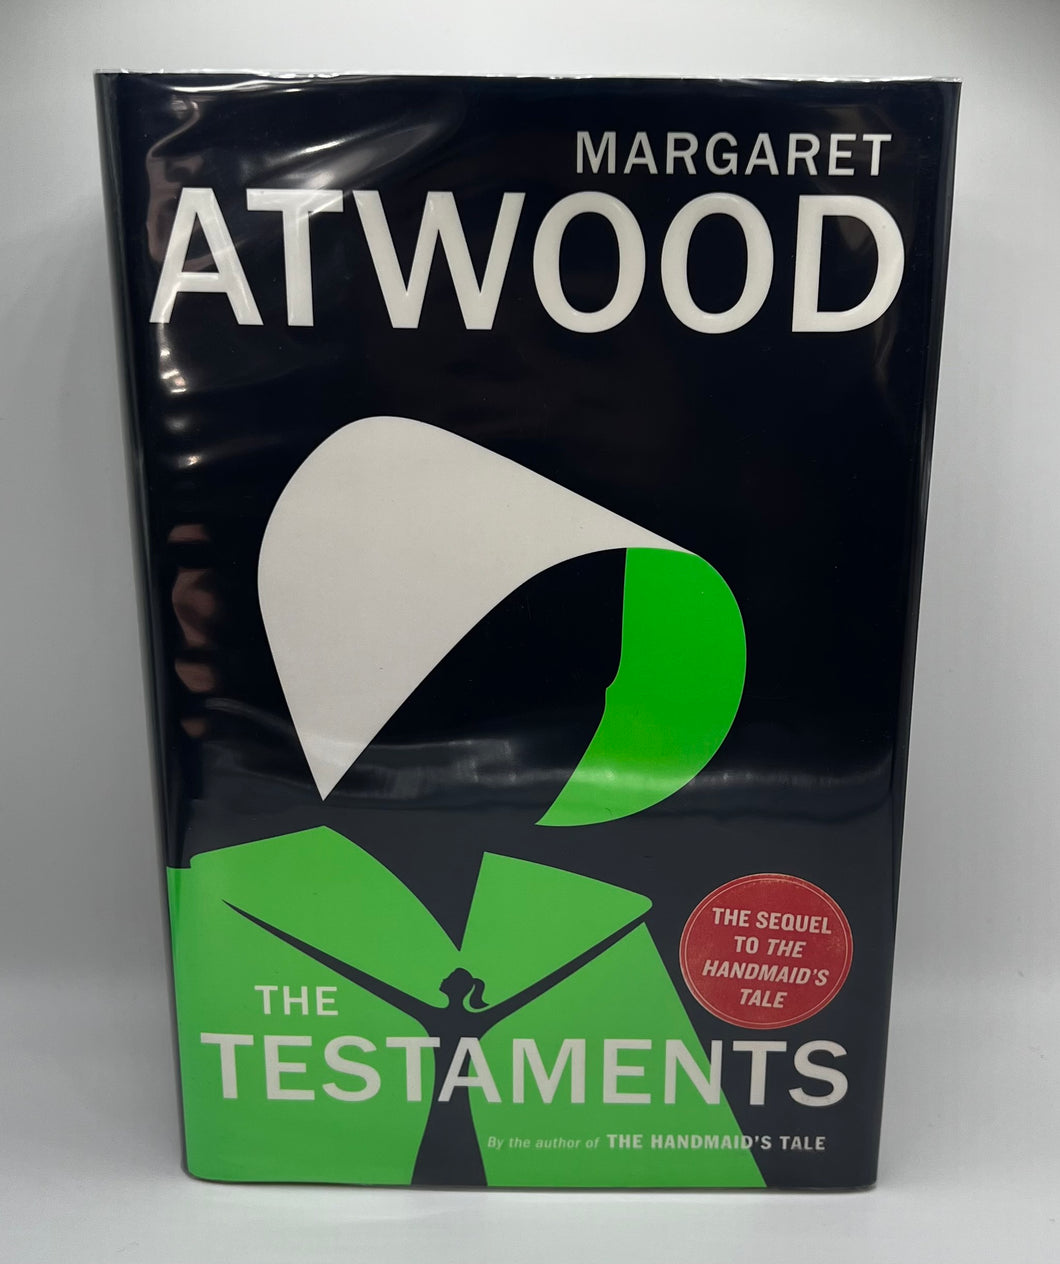 The Testaments, by Margaret Atwood (1st edition)